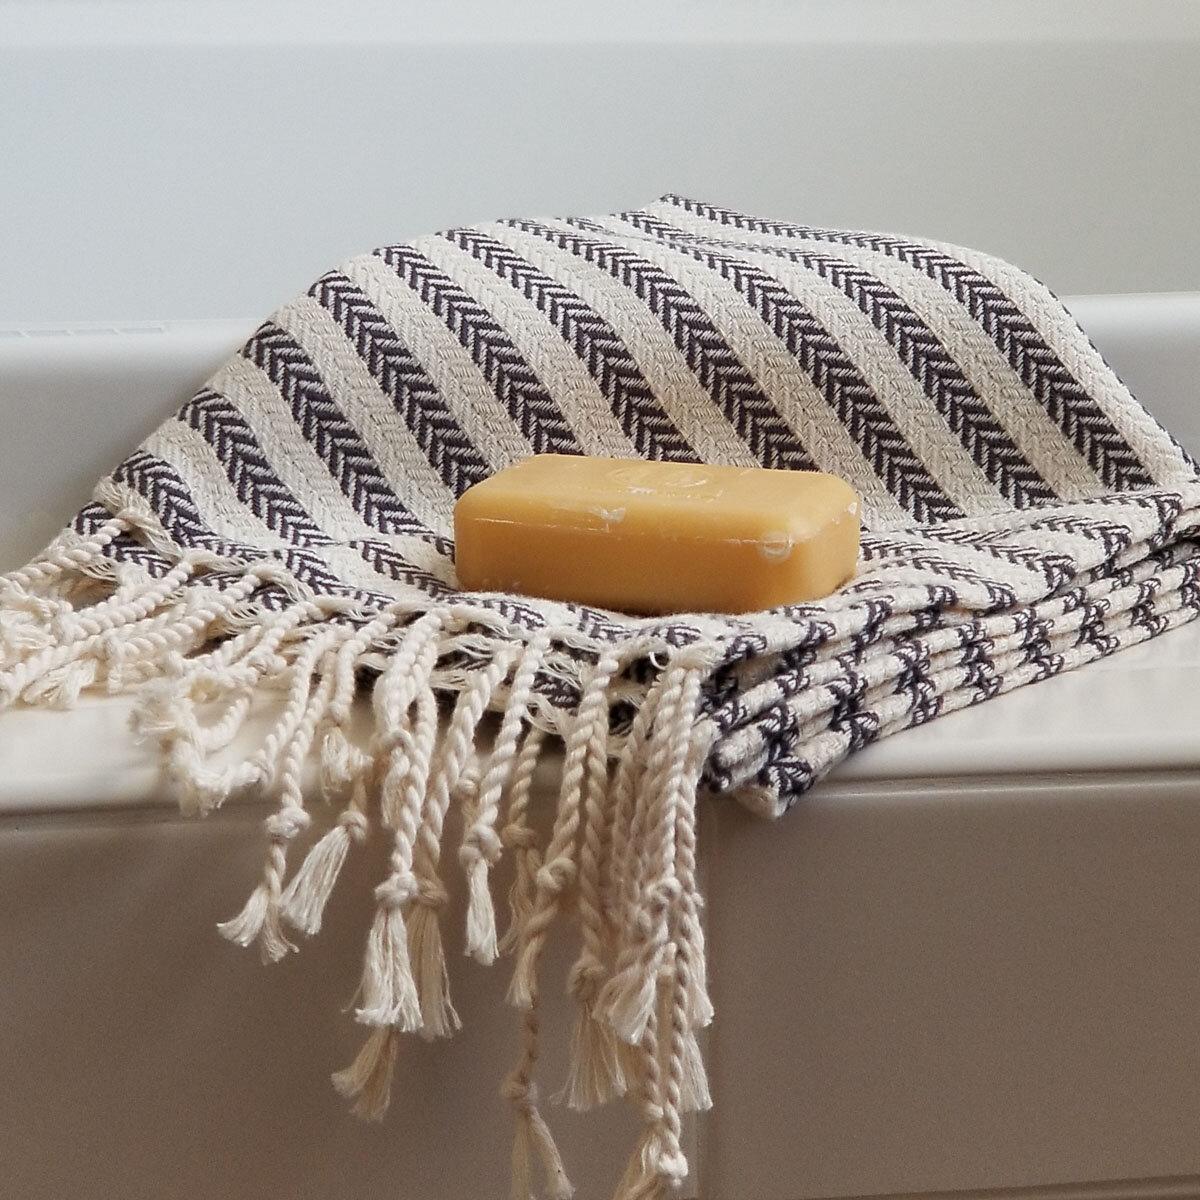 Gift Set from QuiQuattro - Turkish towel hand towel and a soap